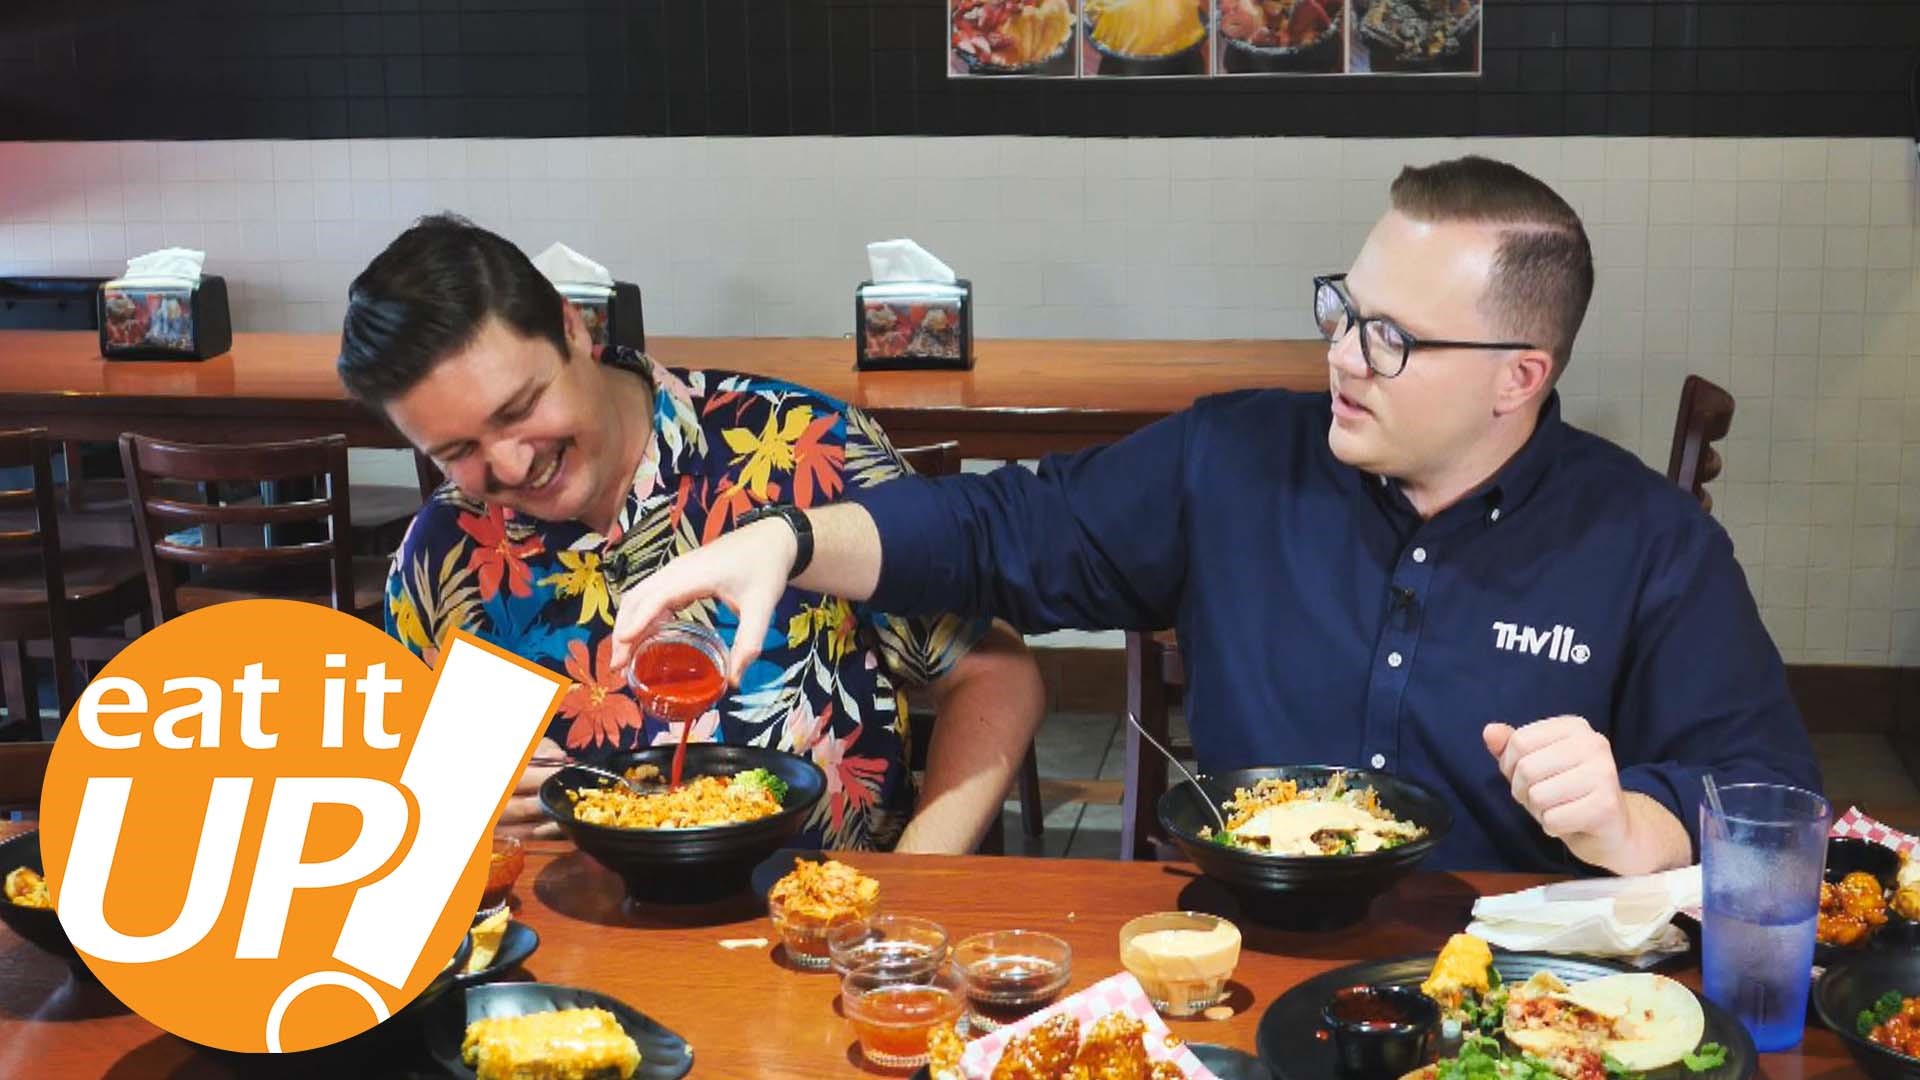 This week, Skot and Tyler take us to Conway's Bulgogi Korean BBQ, a restaurant that has made quite the name for itself in the community.